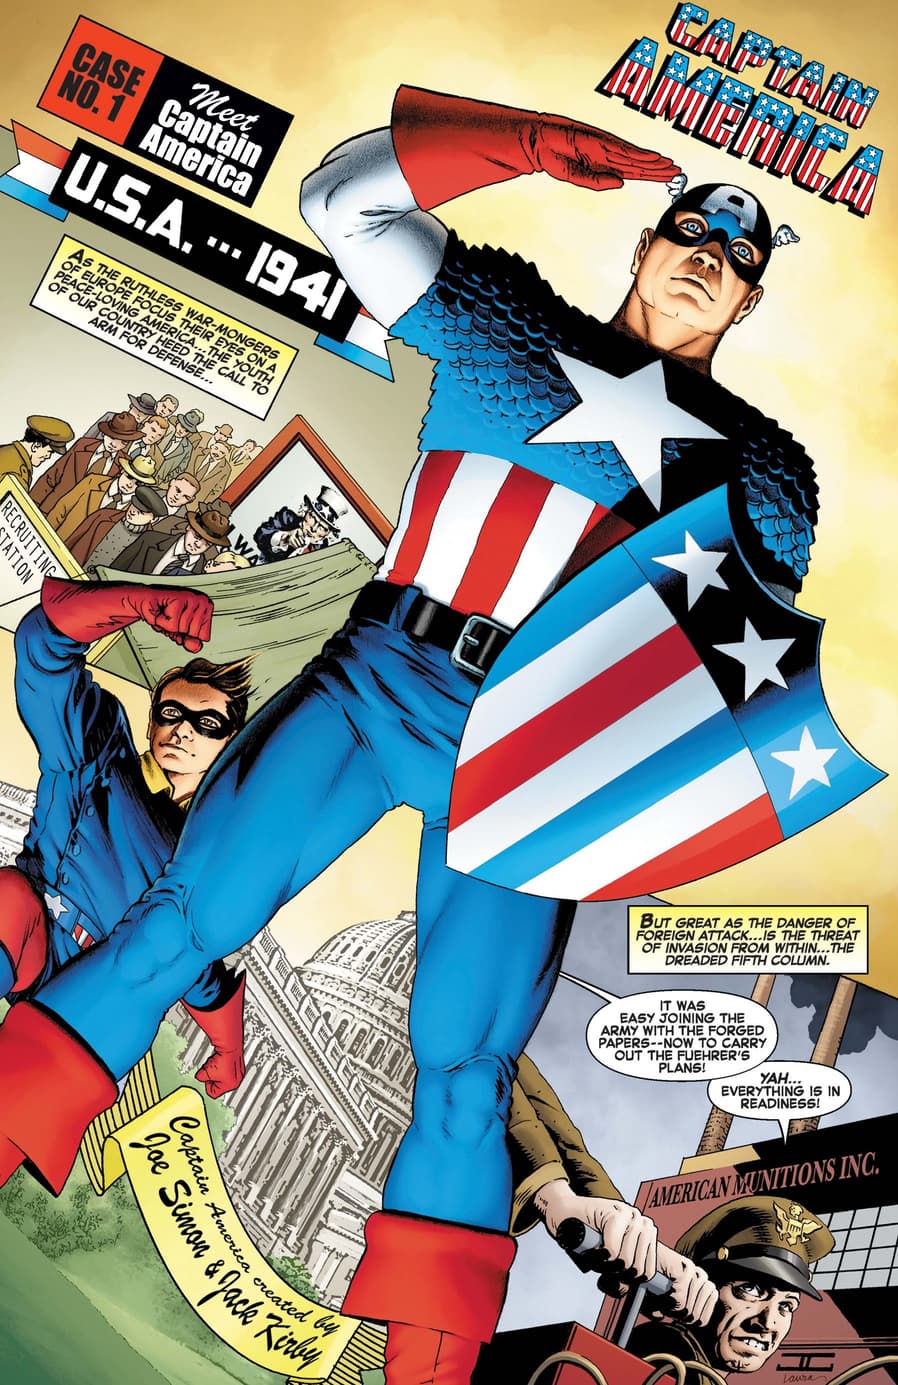 An homage to Cap and Bucky's first appearances in CAPTAIN AMERICA ANNIVERSARY TRIBUTE (2021) #1.